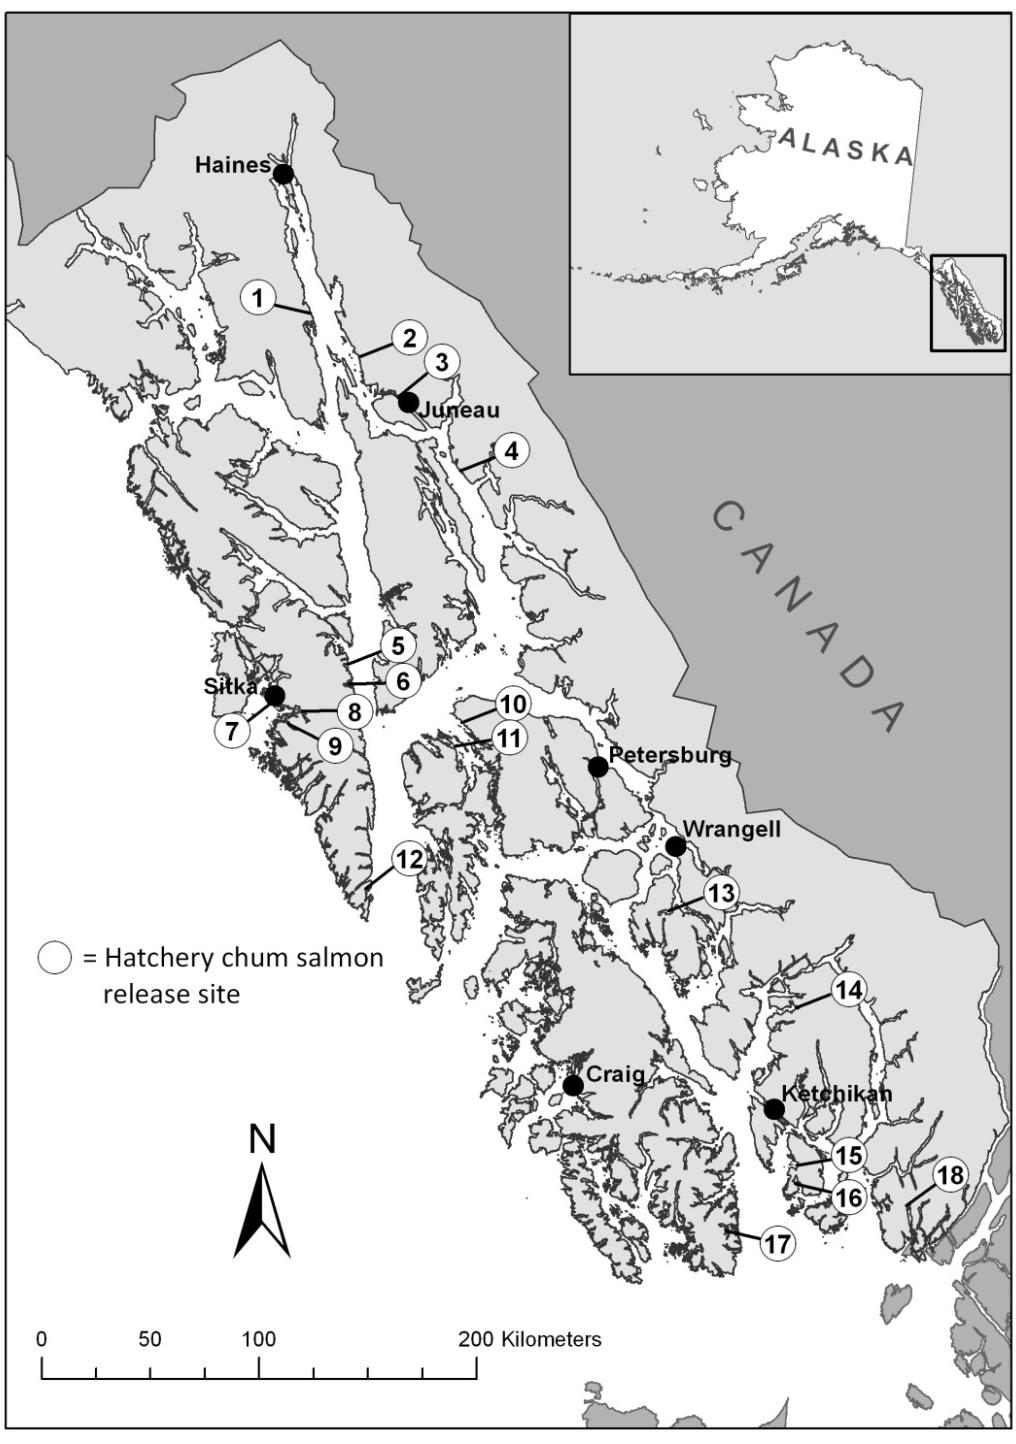 Figure 6. Map of Southeast Alaska showing major towns and current hatchery chum salmon release sites.